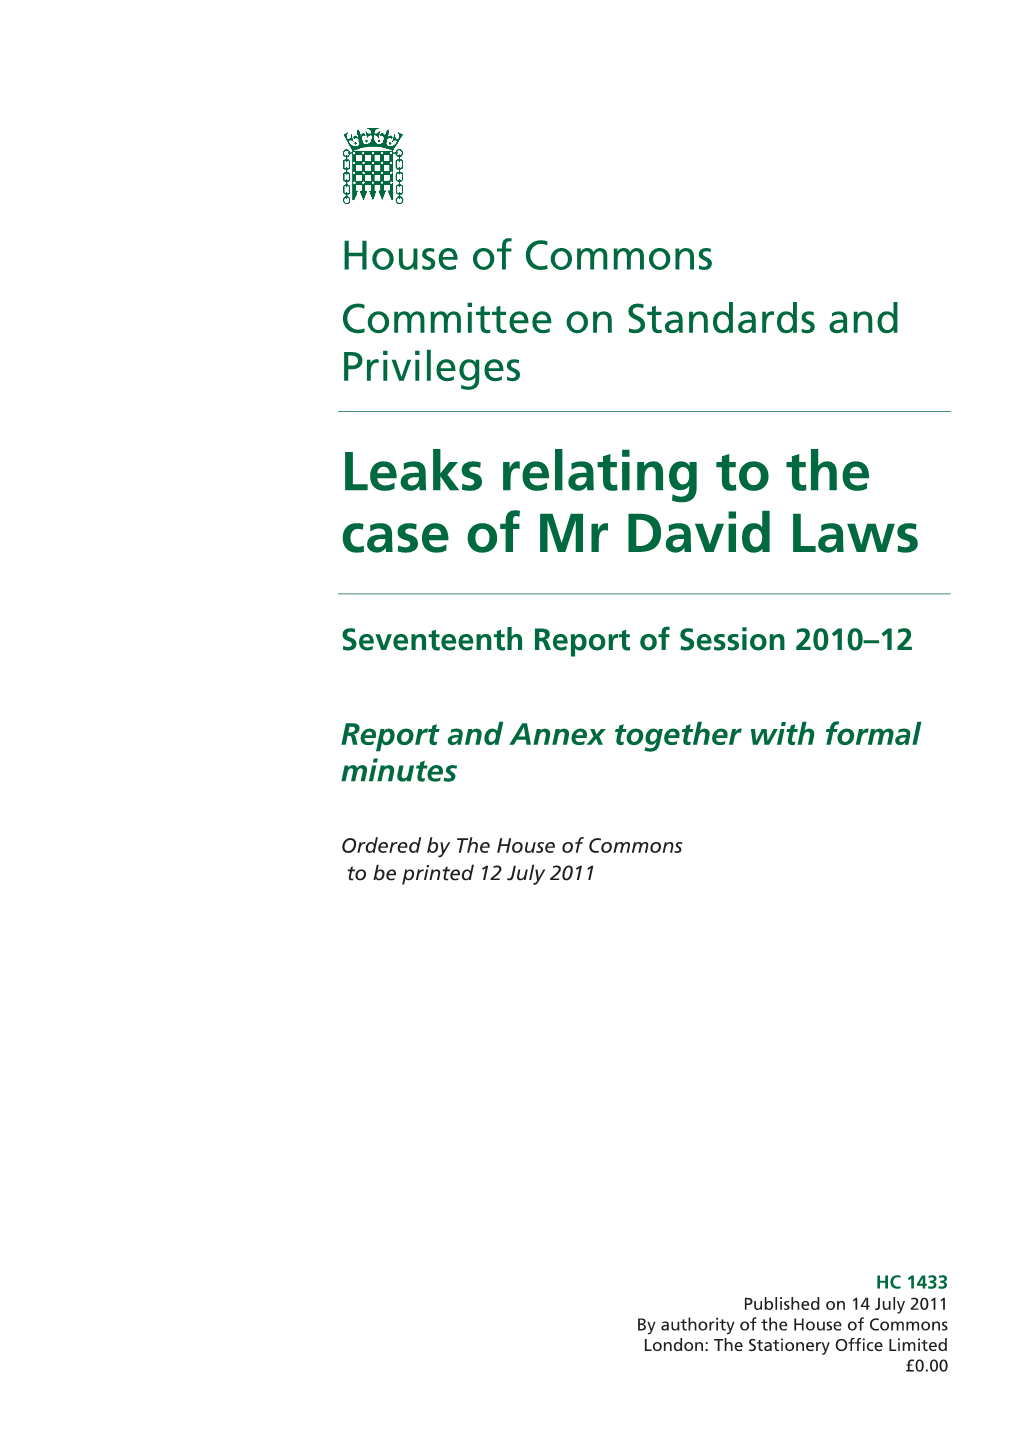 Leaks Relating to the Case of Mr David Laws